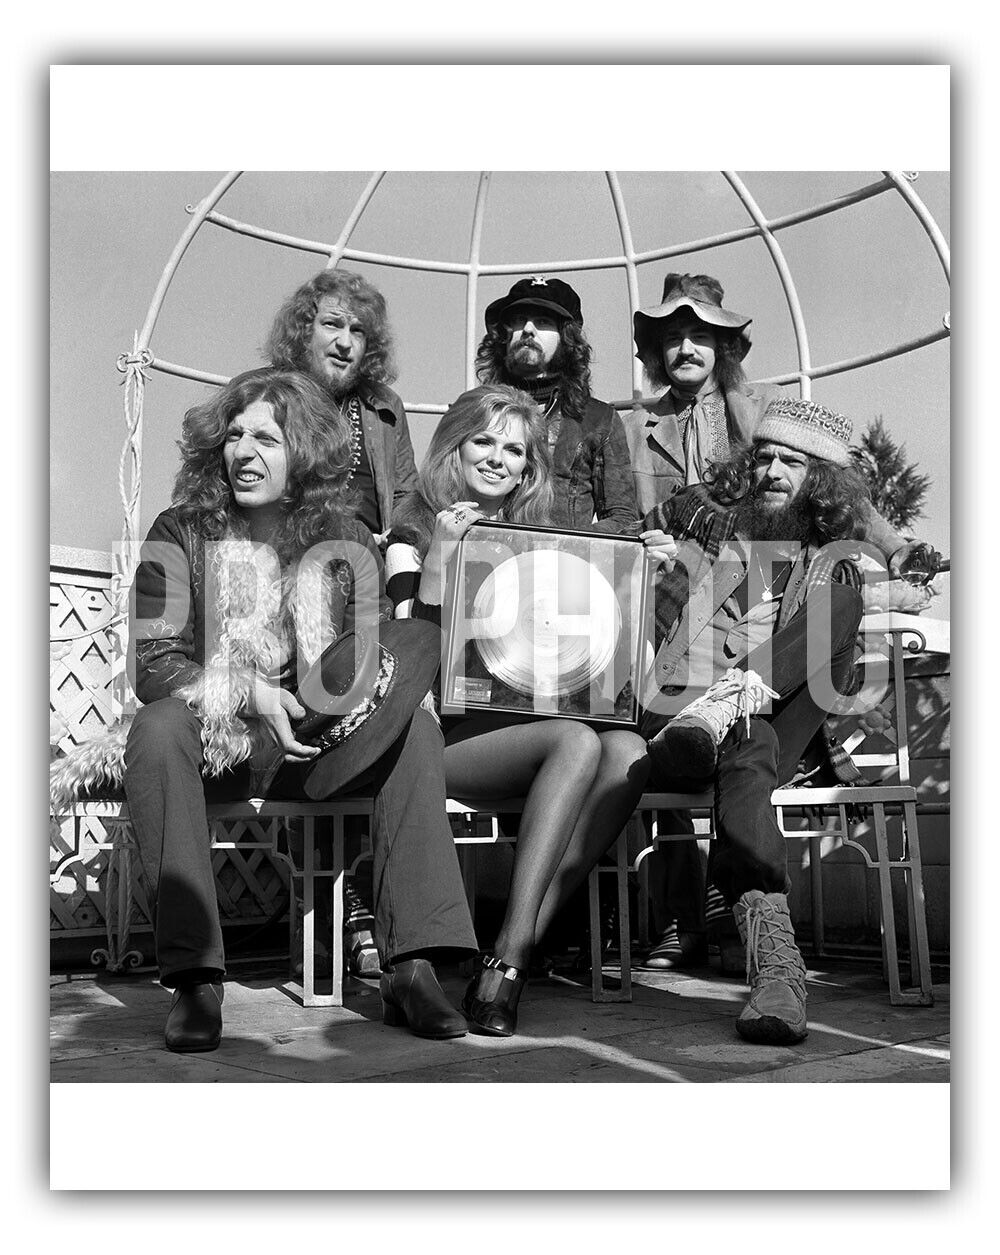 Publicity Photo Sexy Julie Ege 1971 Busty Blond Presents Jethro Tull Gold Record